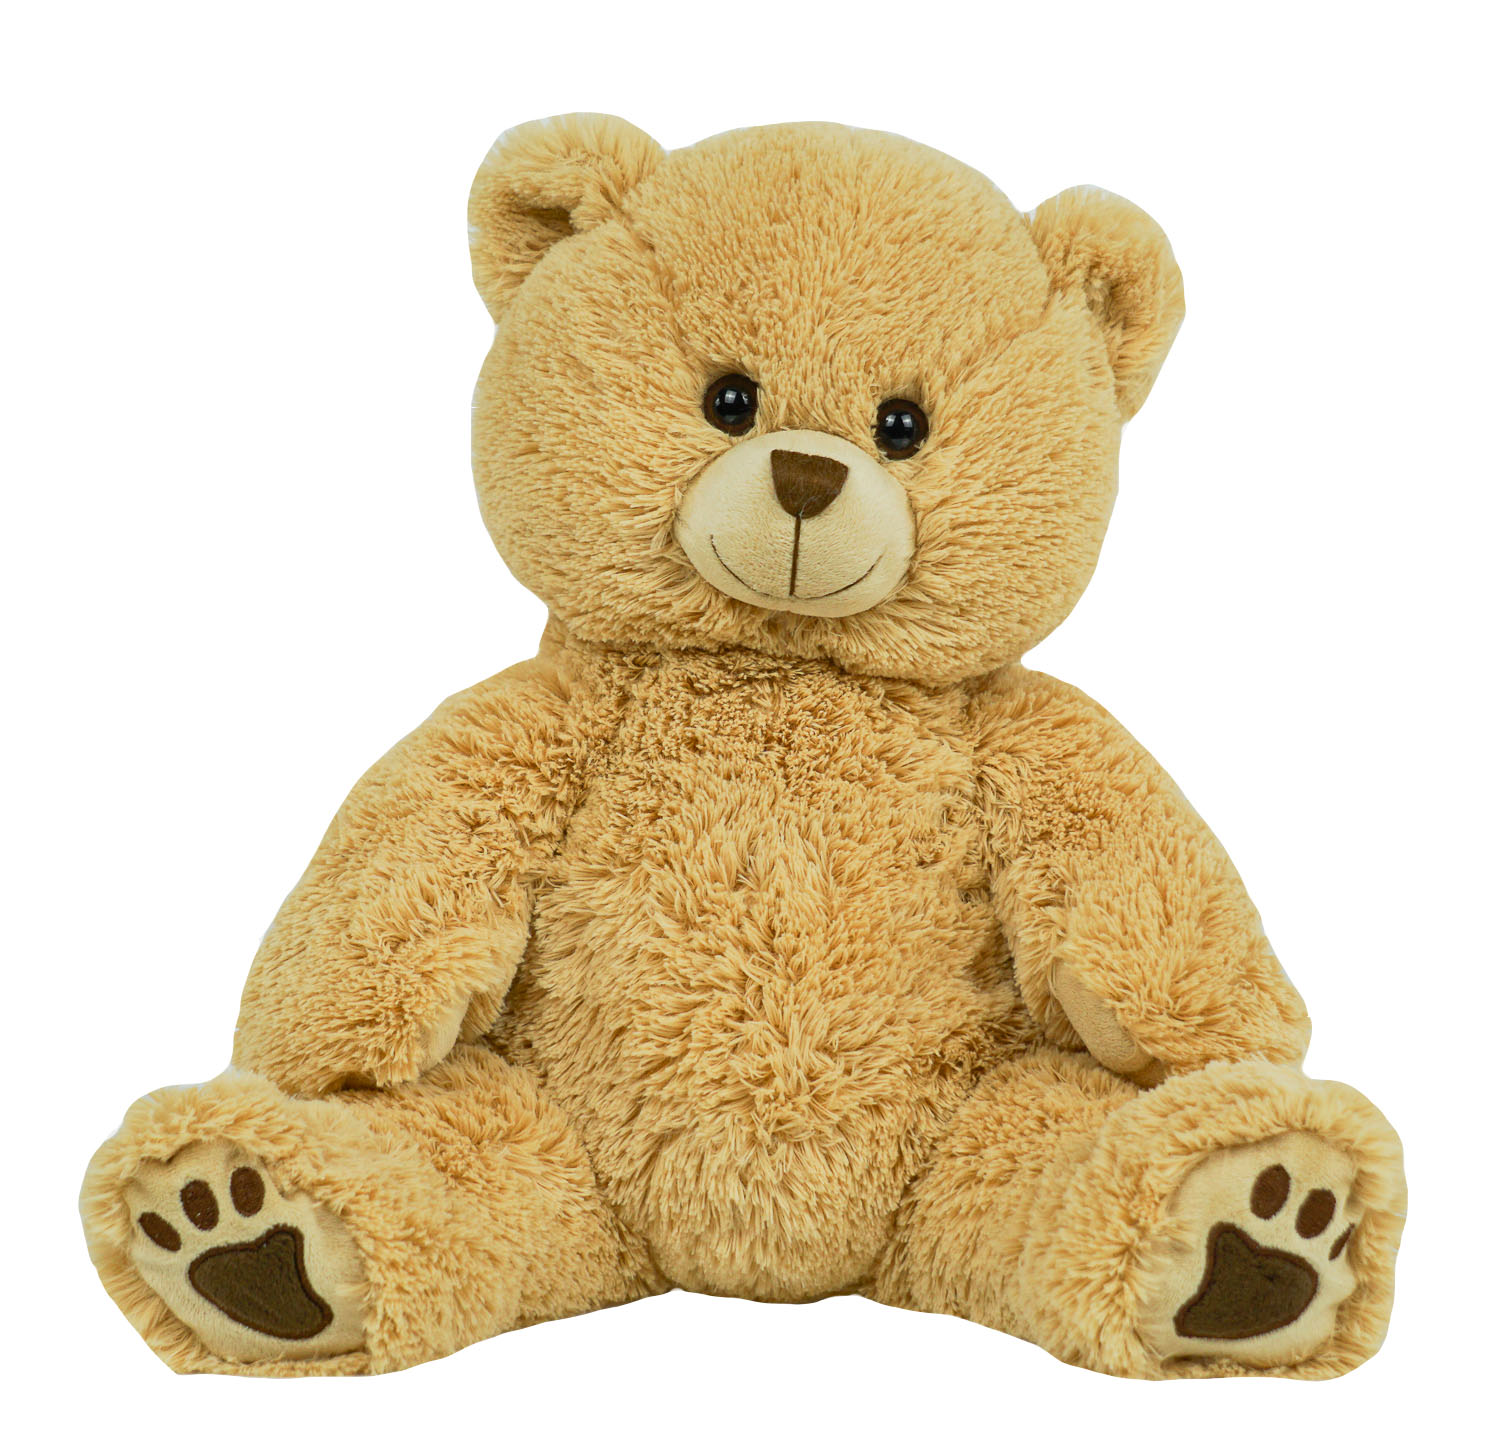 Record Your Own Plush 16 inch Plush Brown Bear Ready To Love In A Few Easy Step 